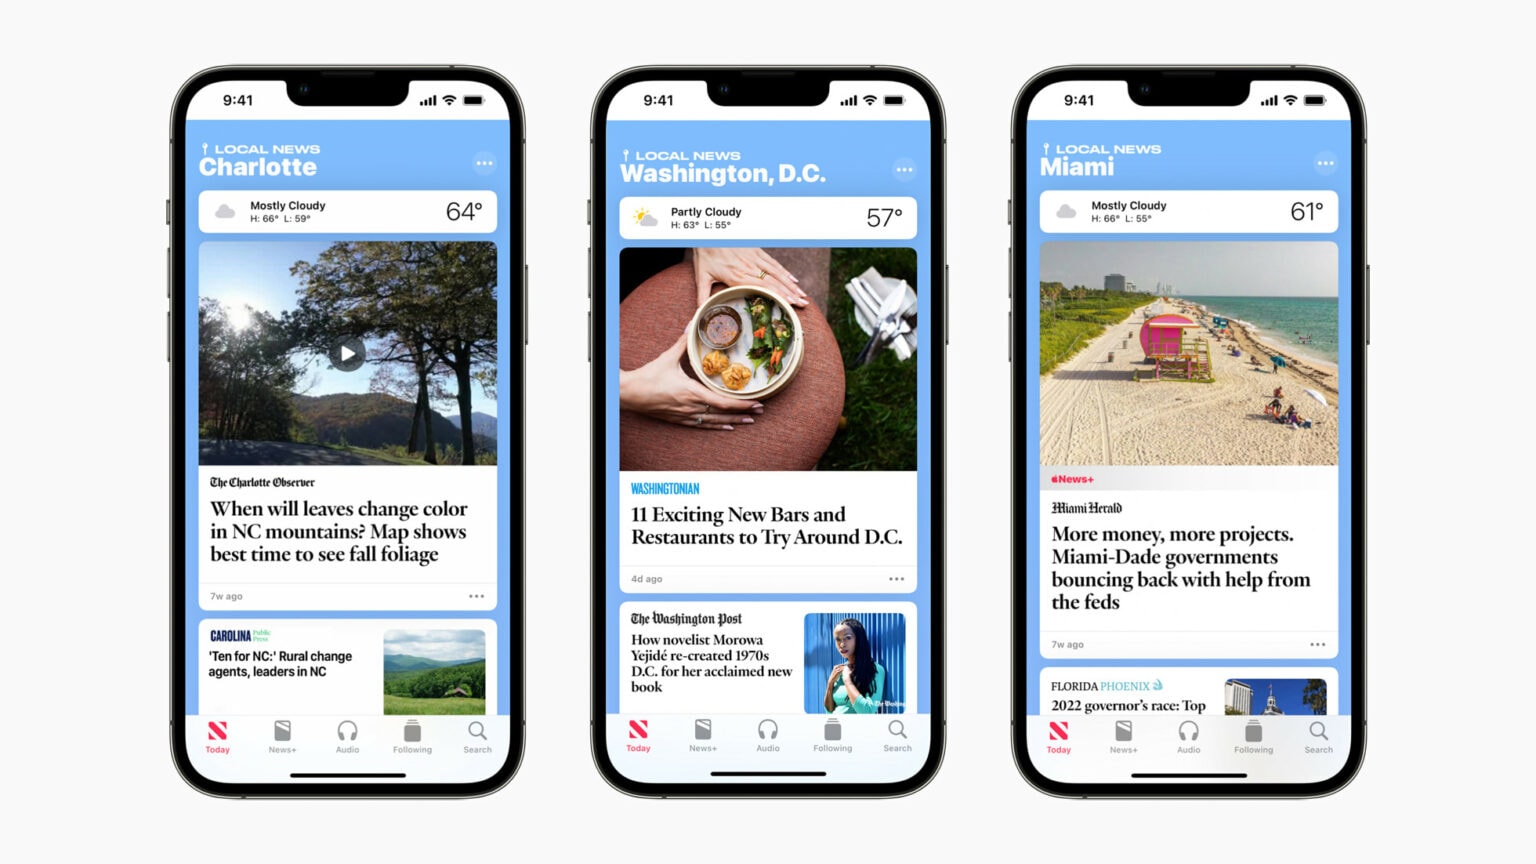 Apple News expands its local coverage to Charlotte, Miami and Washington, D.C.